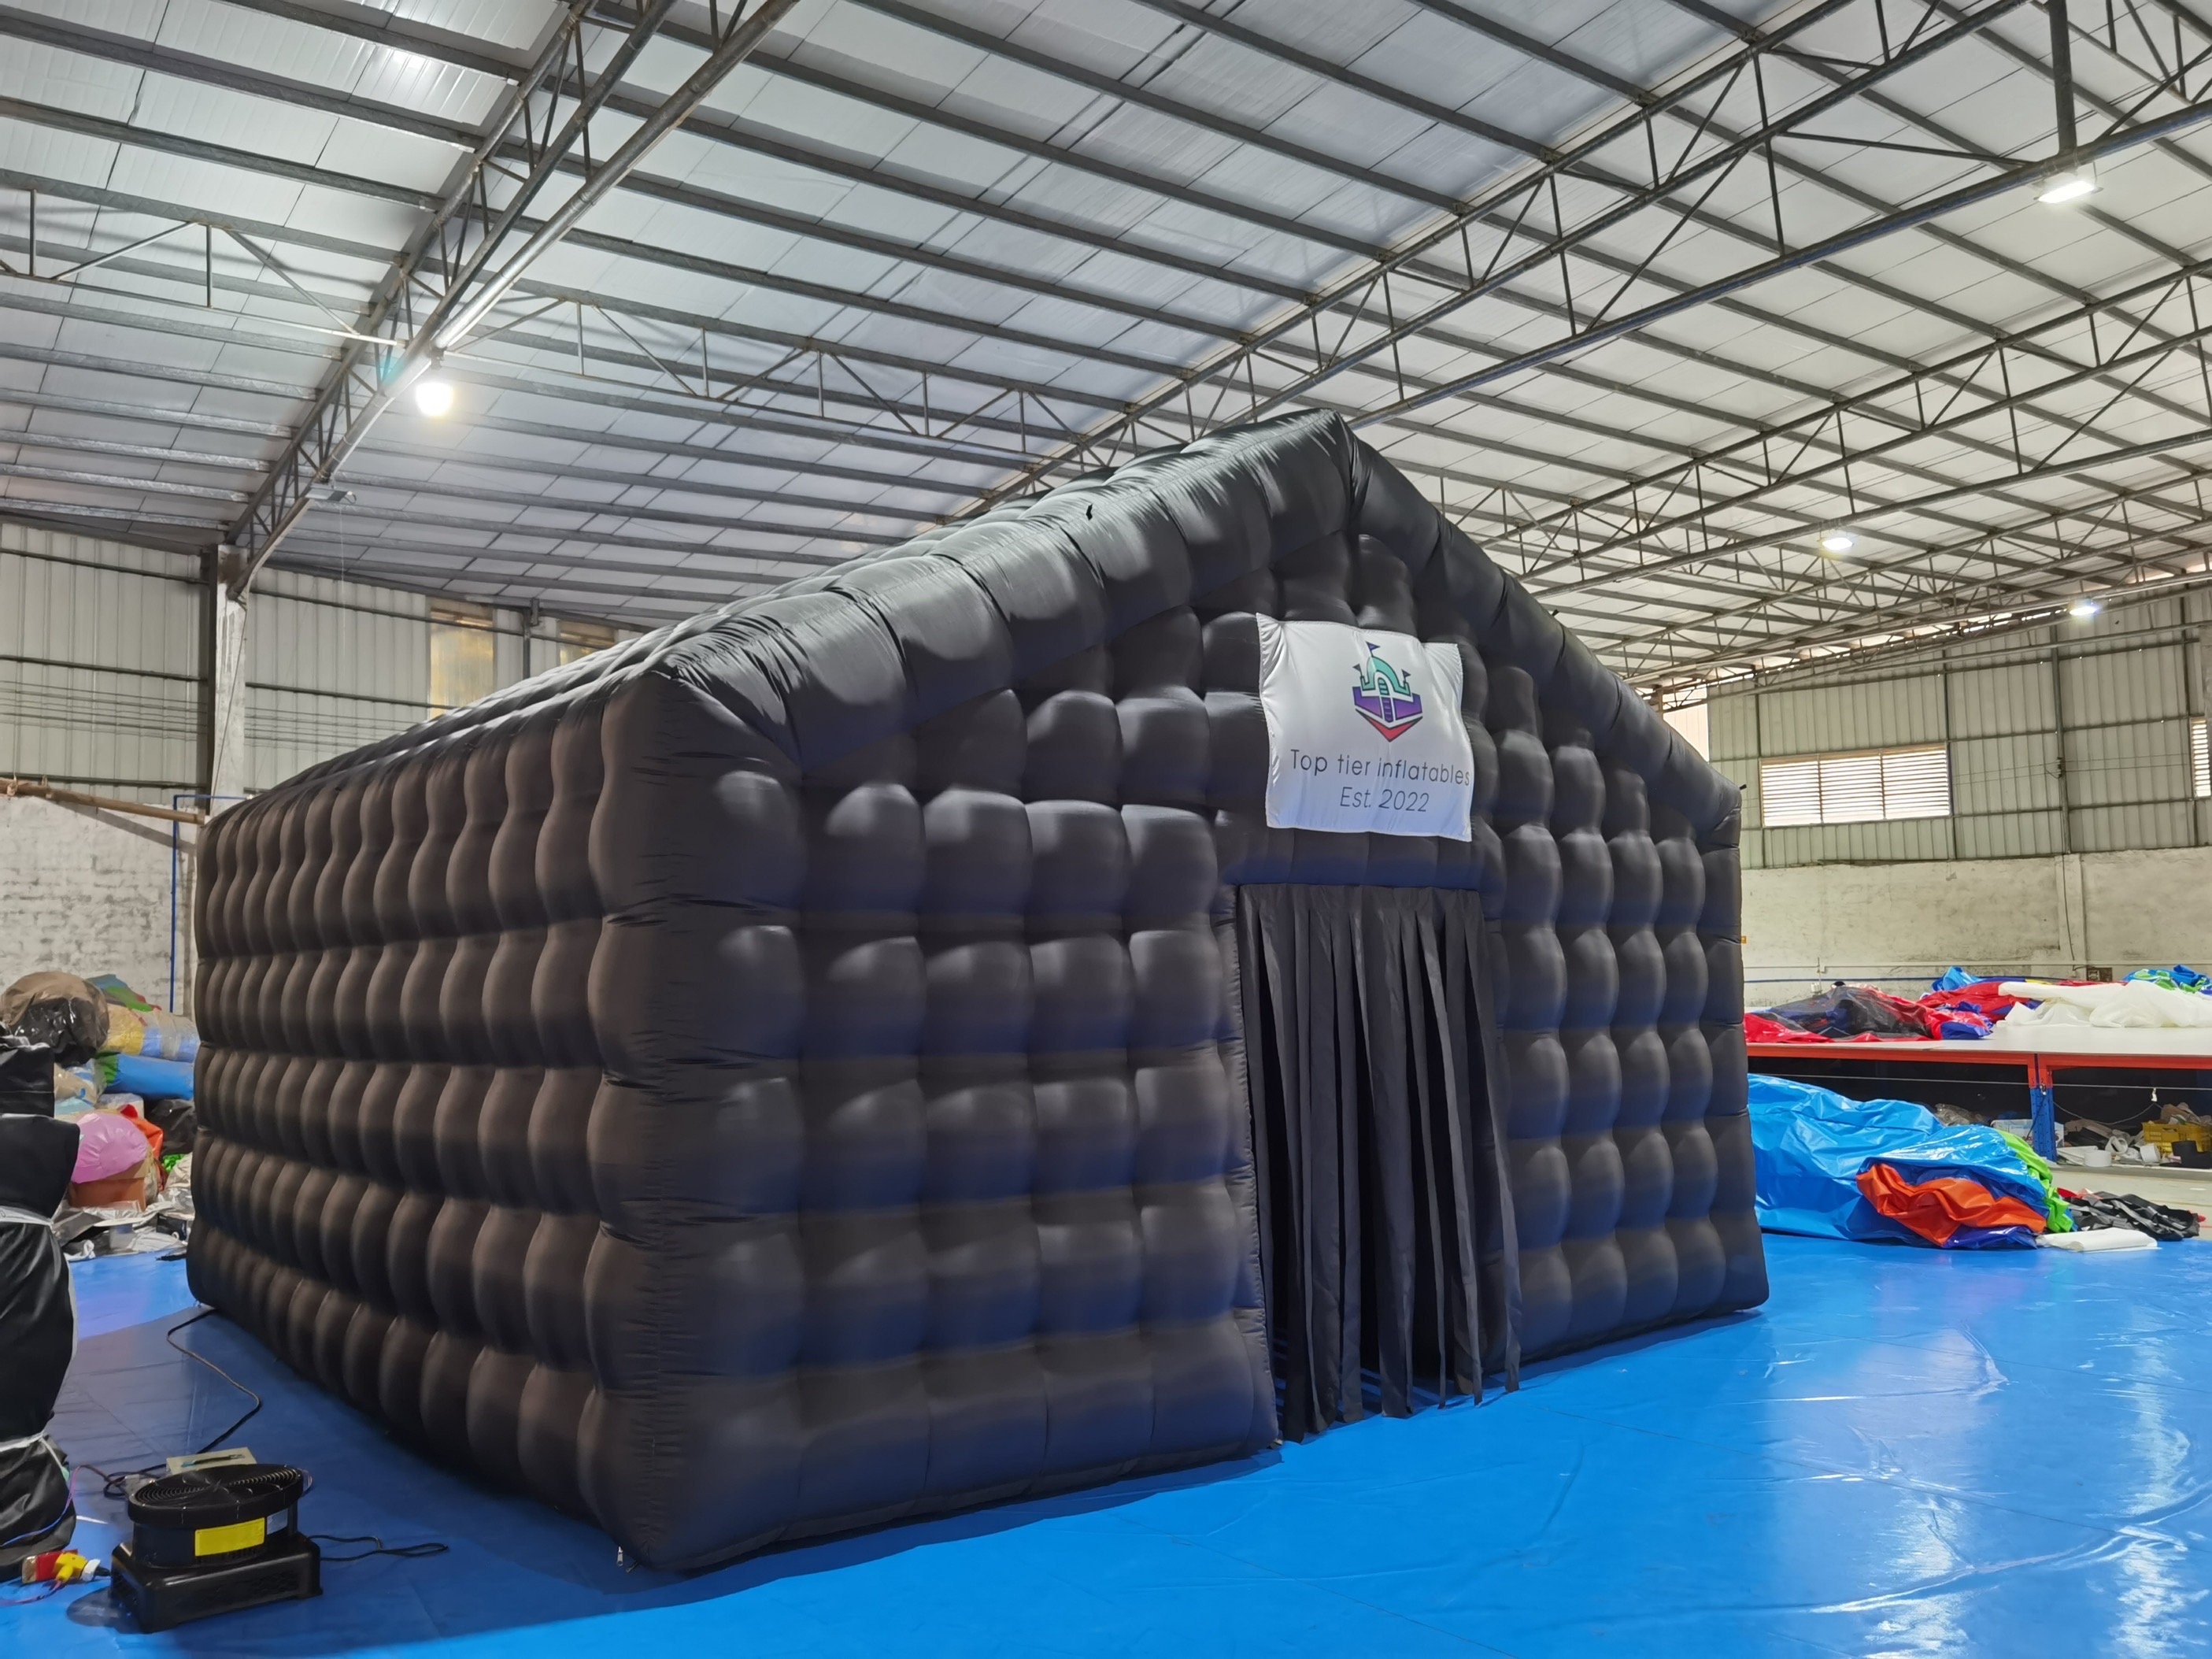 Inflatable Party Tents for Hire - Popup Parties